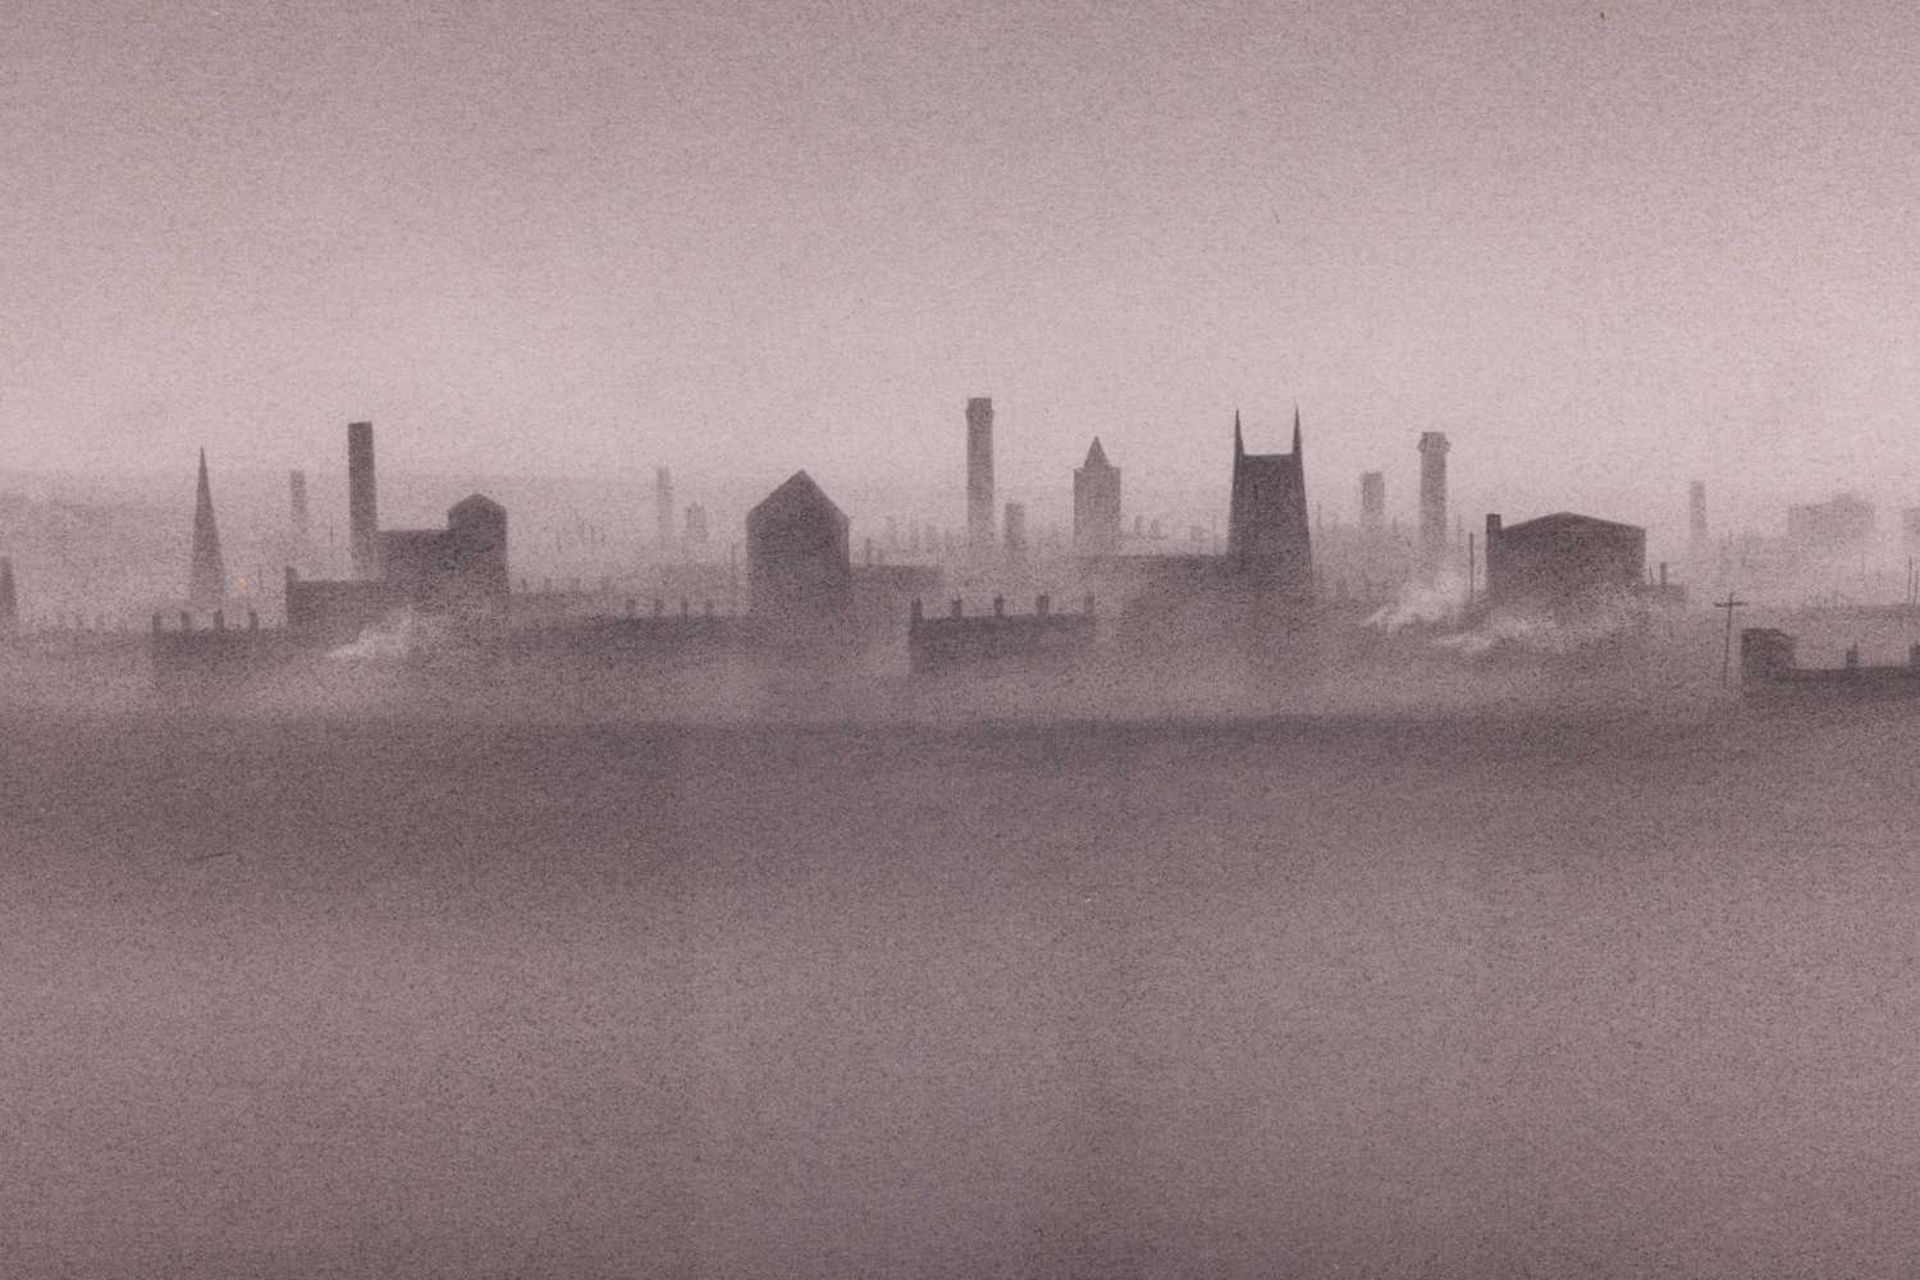 Trevor Grimshaw (1947 - 2001), Northern Industrial Scene, signed and dated 'T. Grimshaw '70' in penc - Image 7 of 12